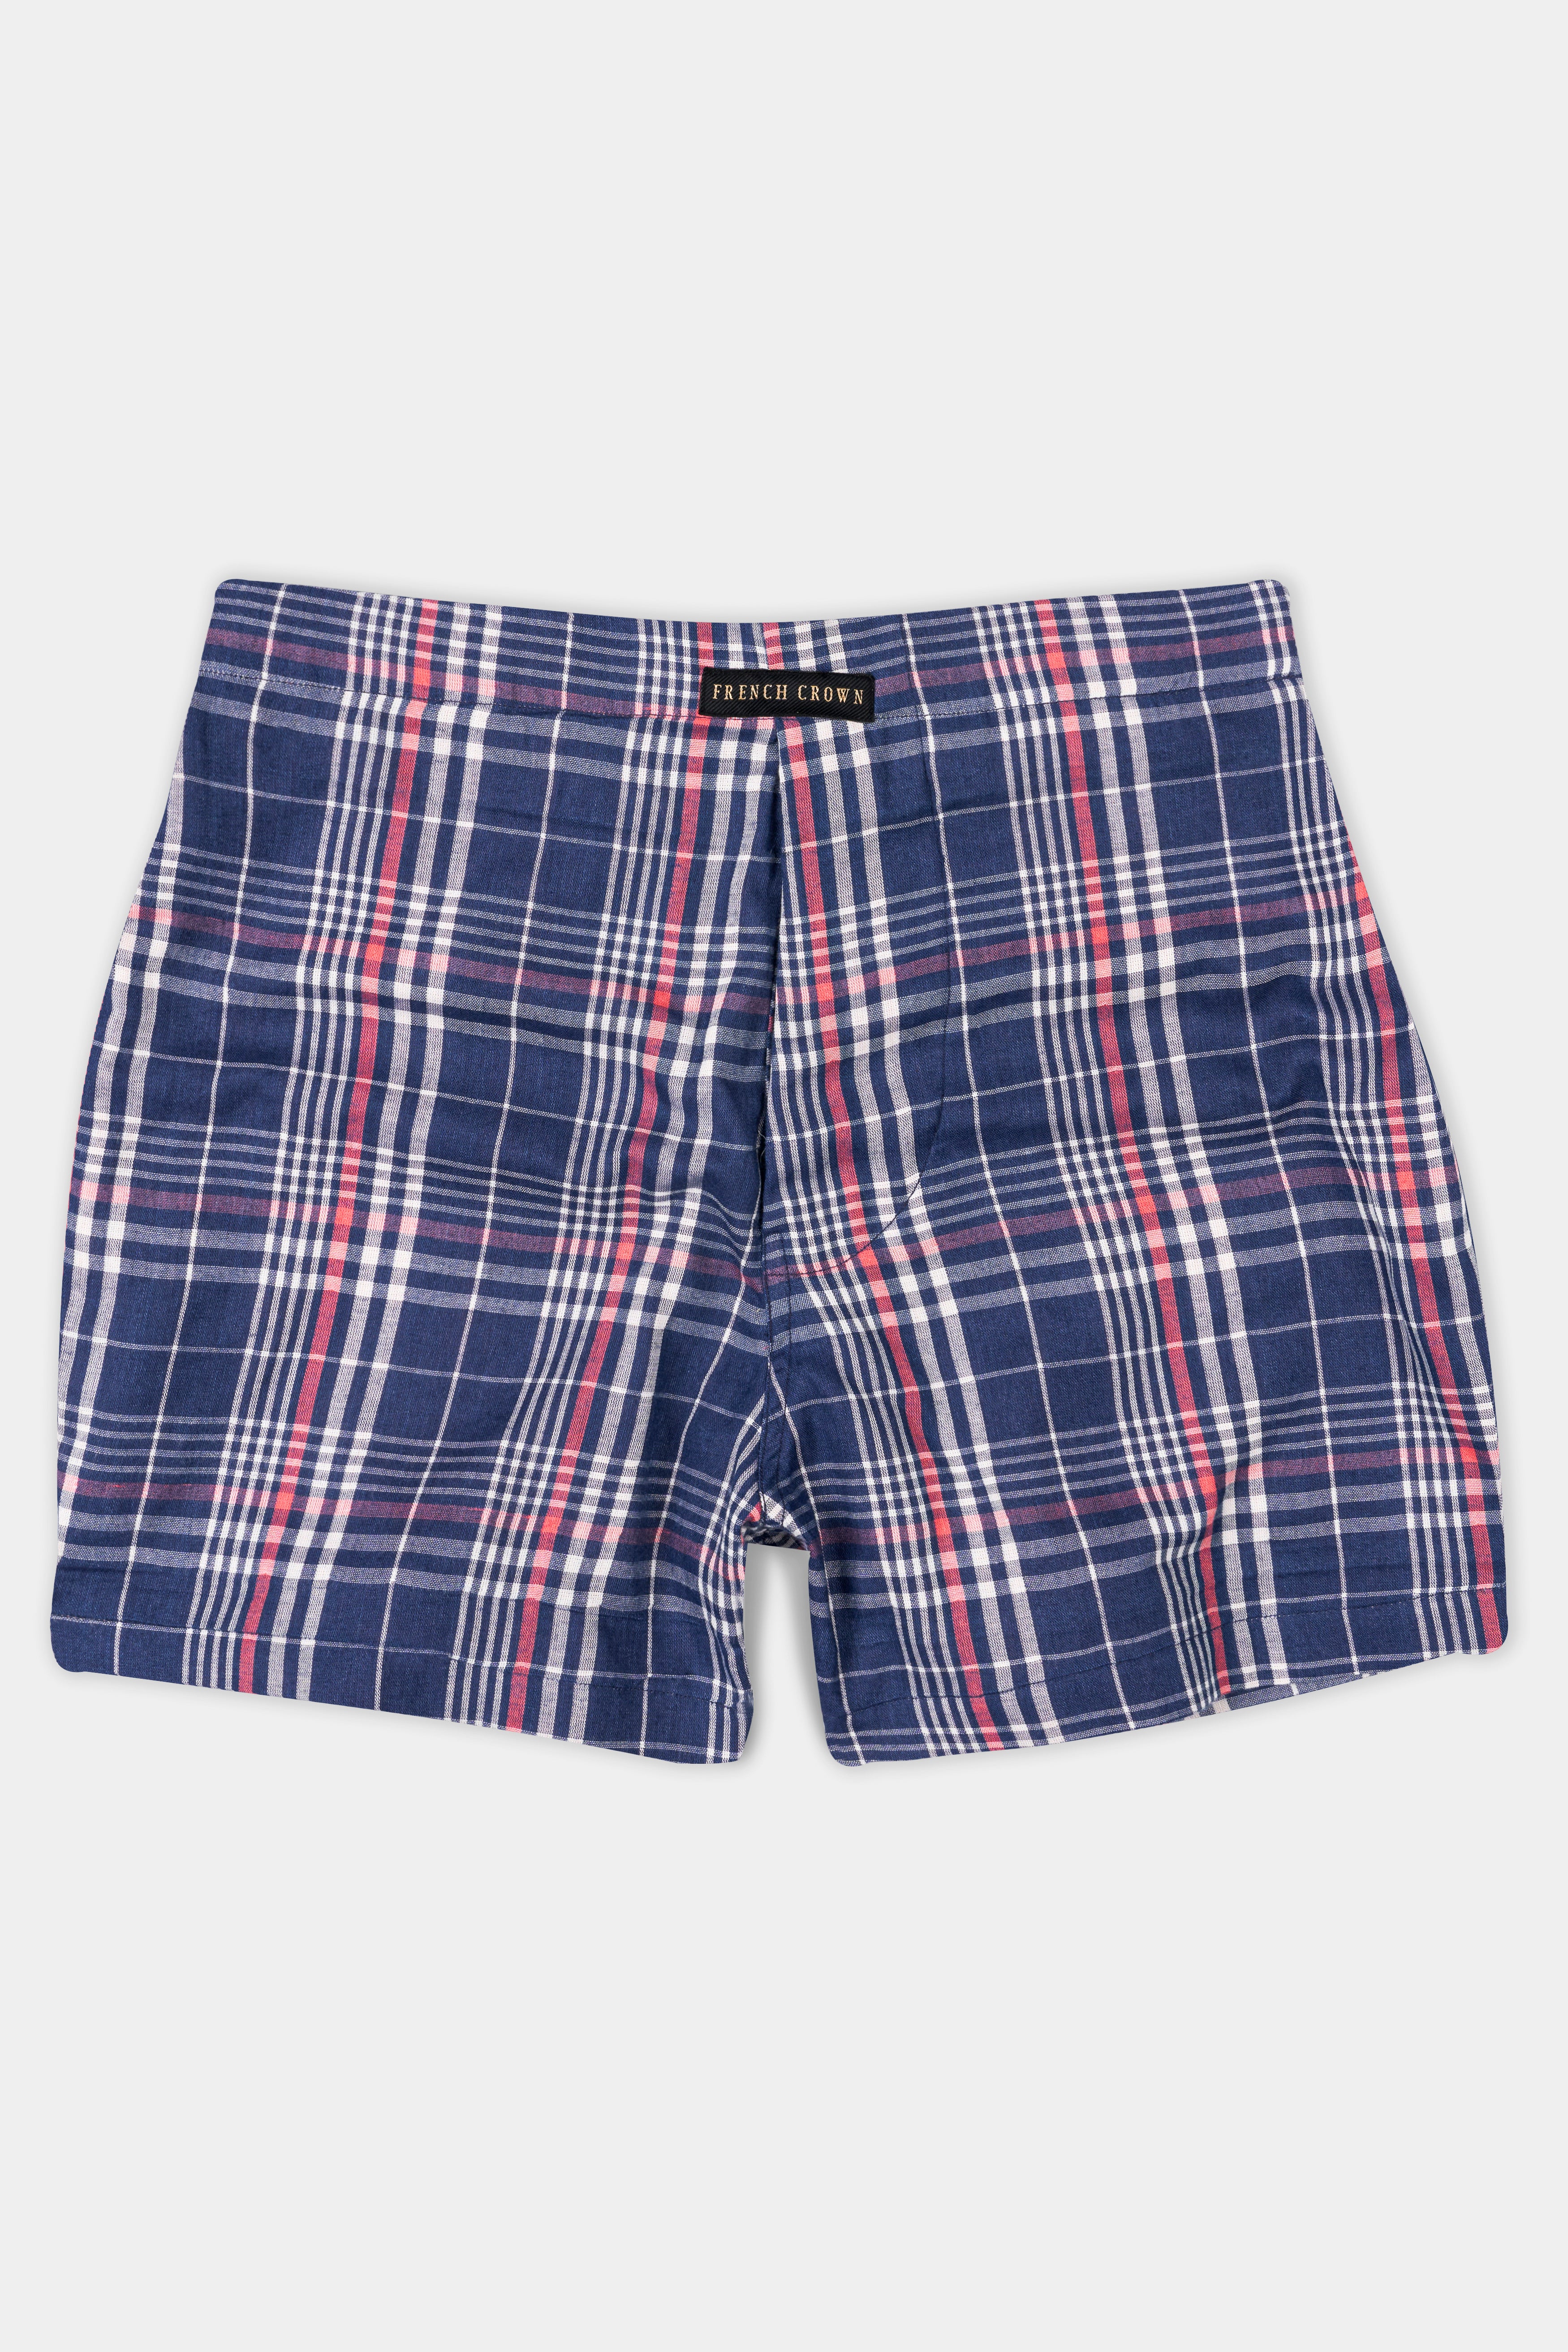 Admiral Blue And Rouge Pink Checkered Premium Cotton Boxer BX542-28, BX542-30, BX542-32, BX542-34, BX542-36, BX542-38, BX542-40, BX542-42, BX542-44